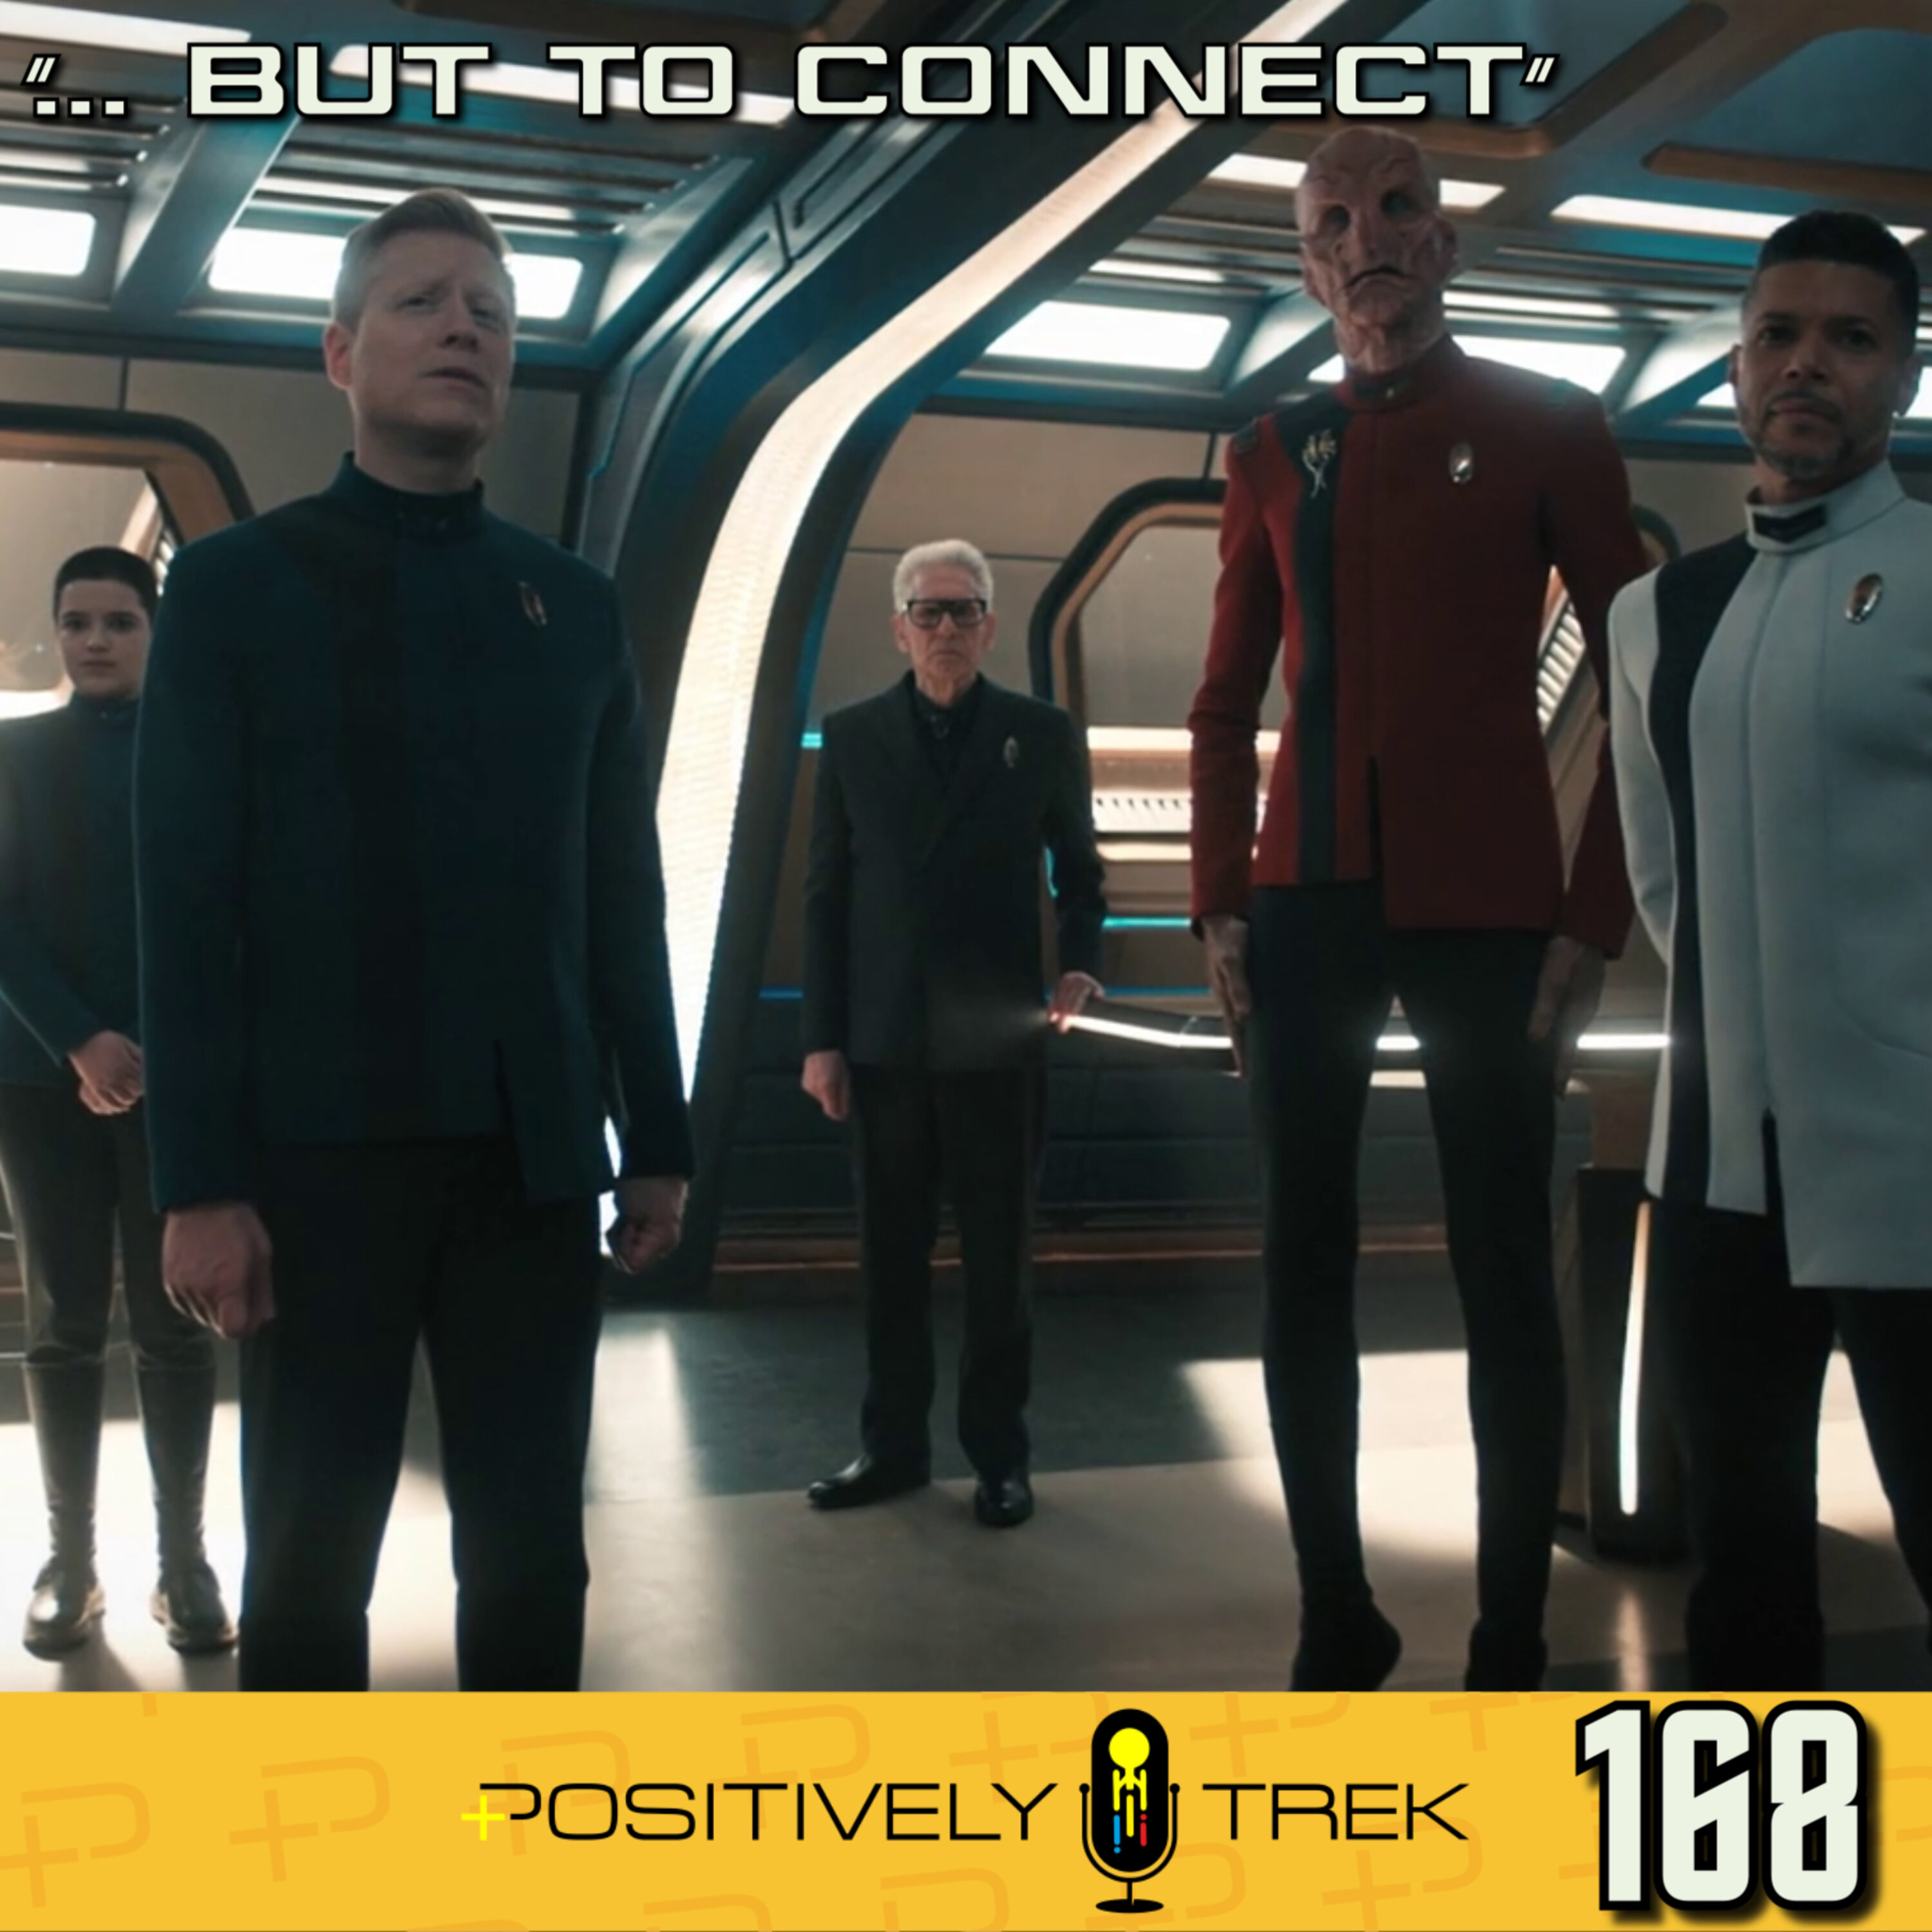 Discovery Review: “... But to Connect” (4.07)